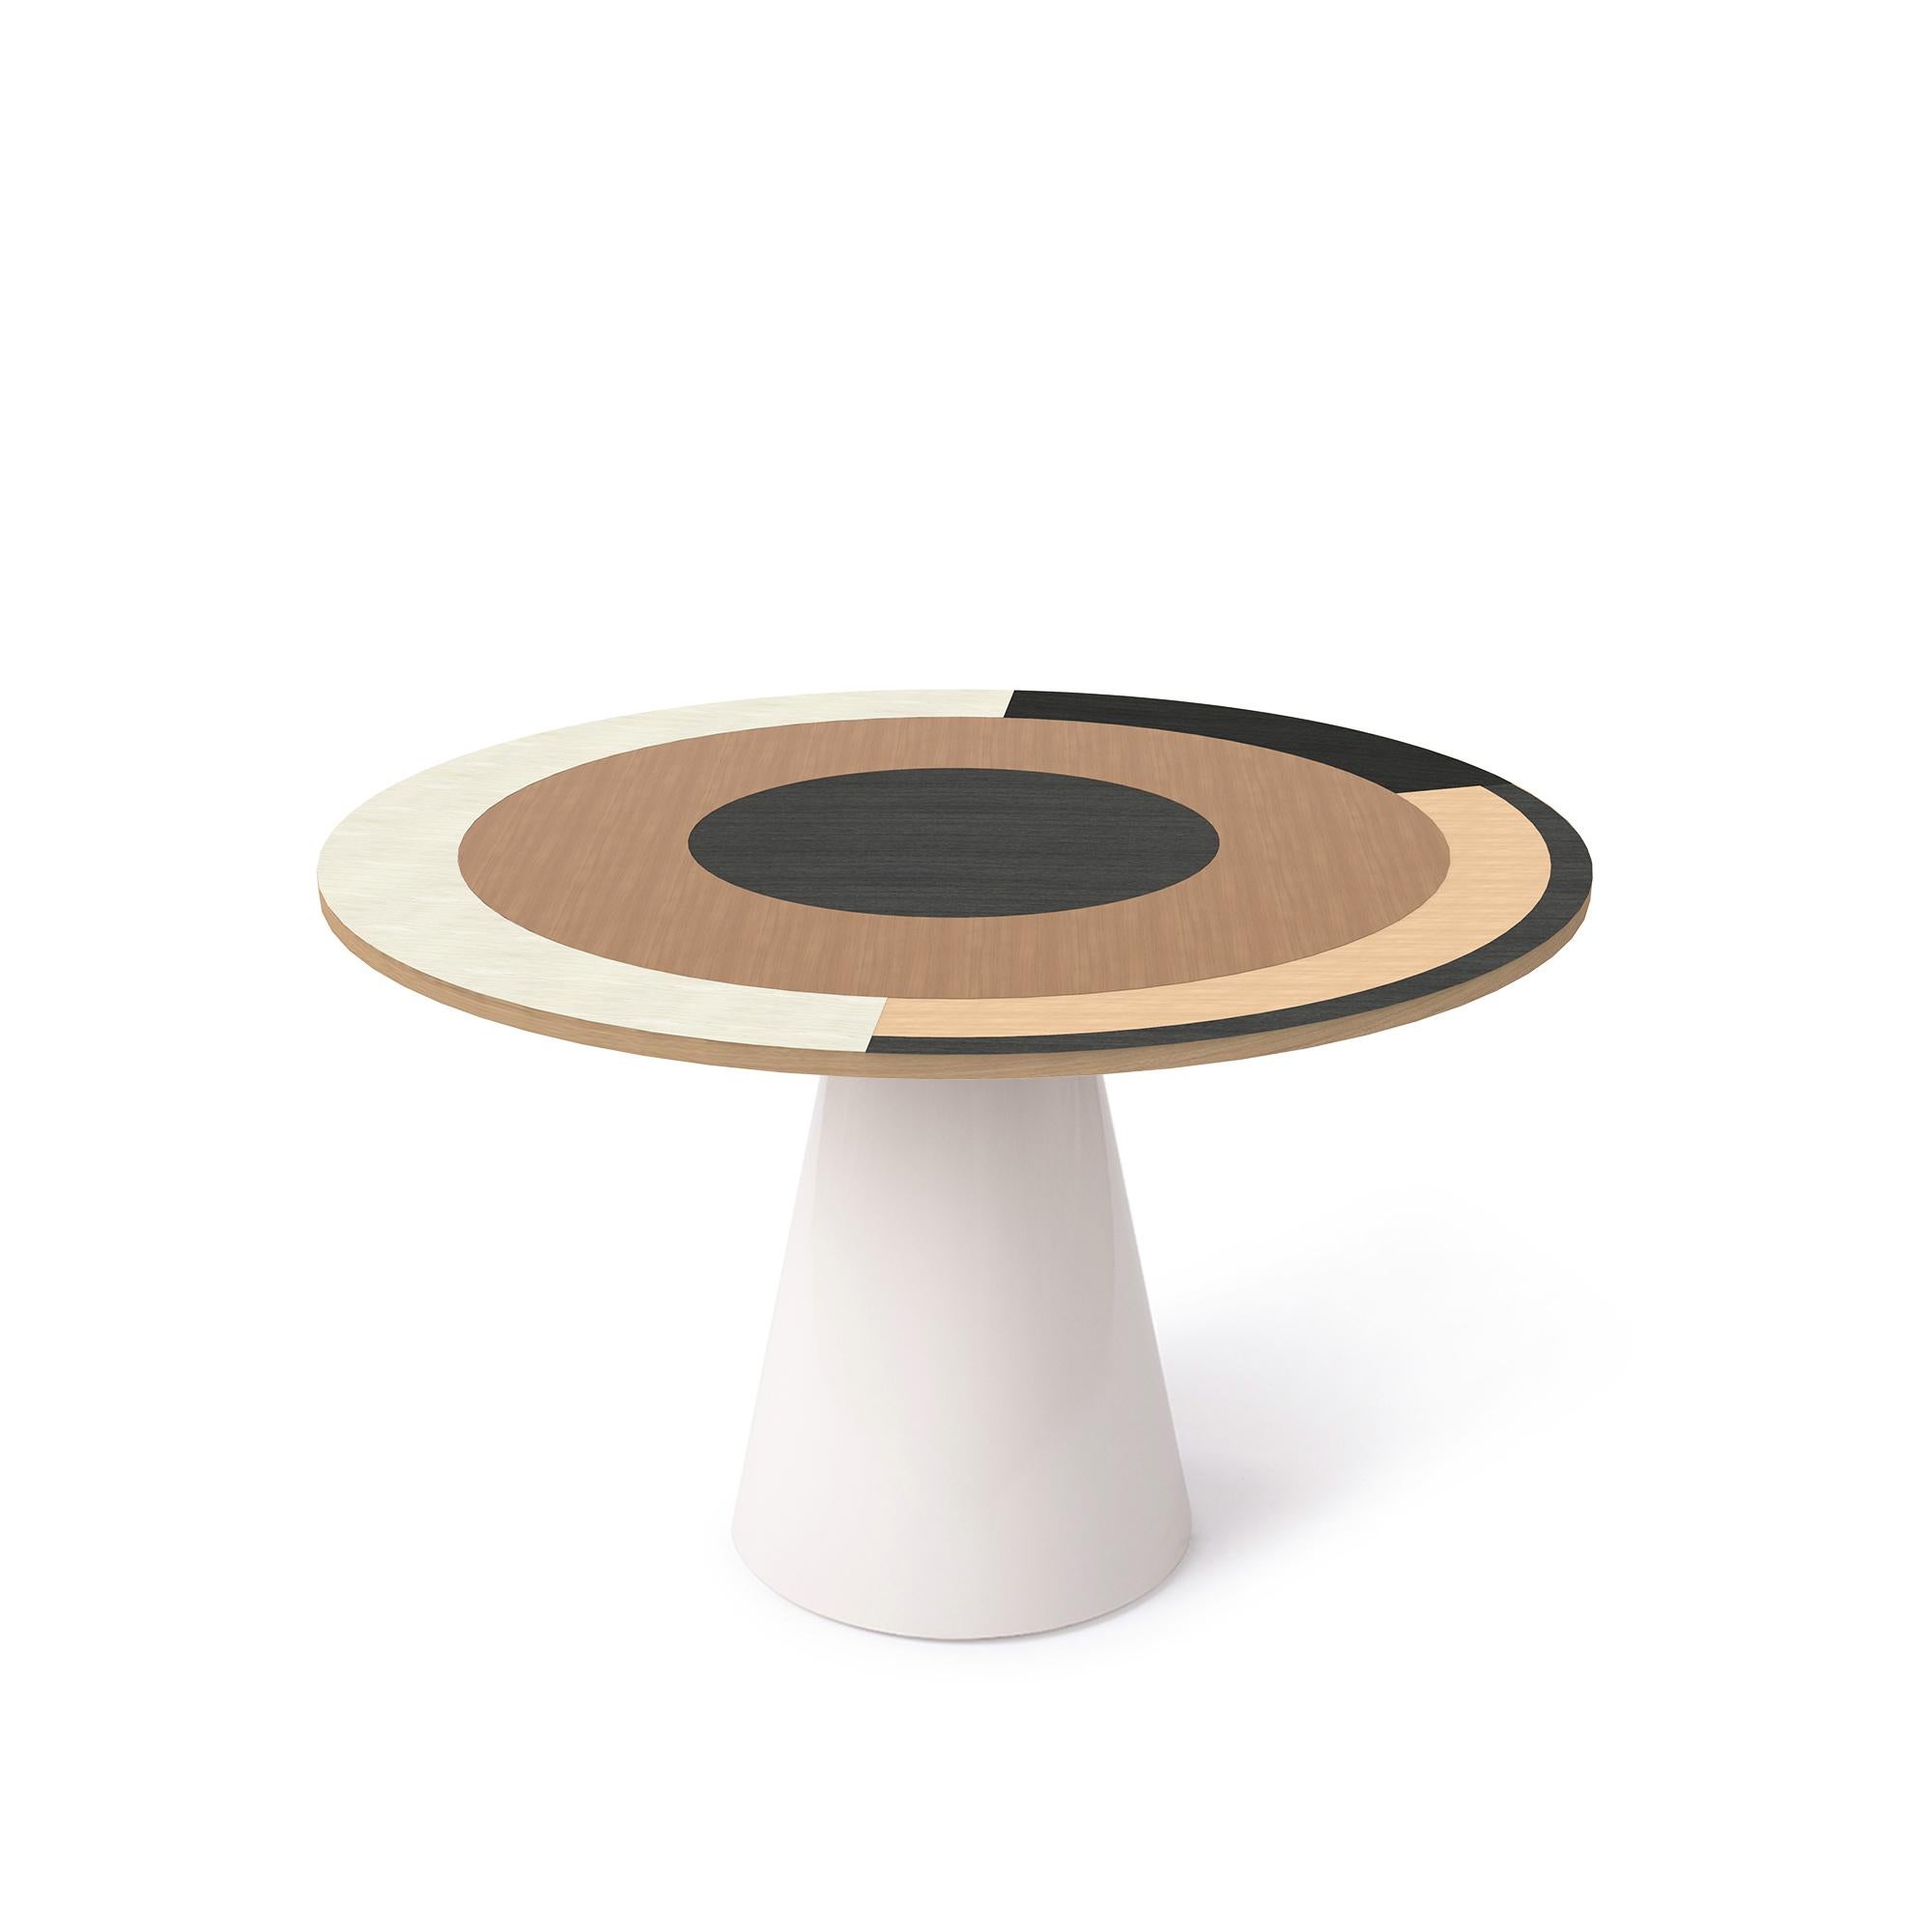 Sonia et Caetera dining table M2 designed by Thomas Dariel
Dimensions: 
Small: Diameter 100 x H 74 cm 
Medium: Diameter 115 x H 74 cm 
Large: Diameter 130 x H 74 cm 
Materials: Top in painted ash veneer, fronts in the matte paint finish,